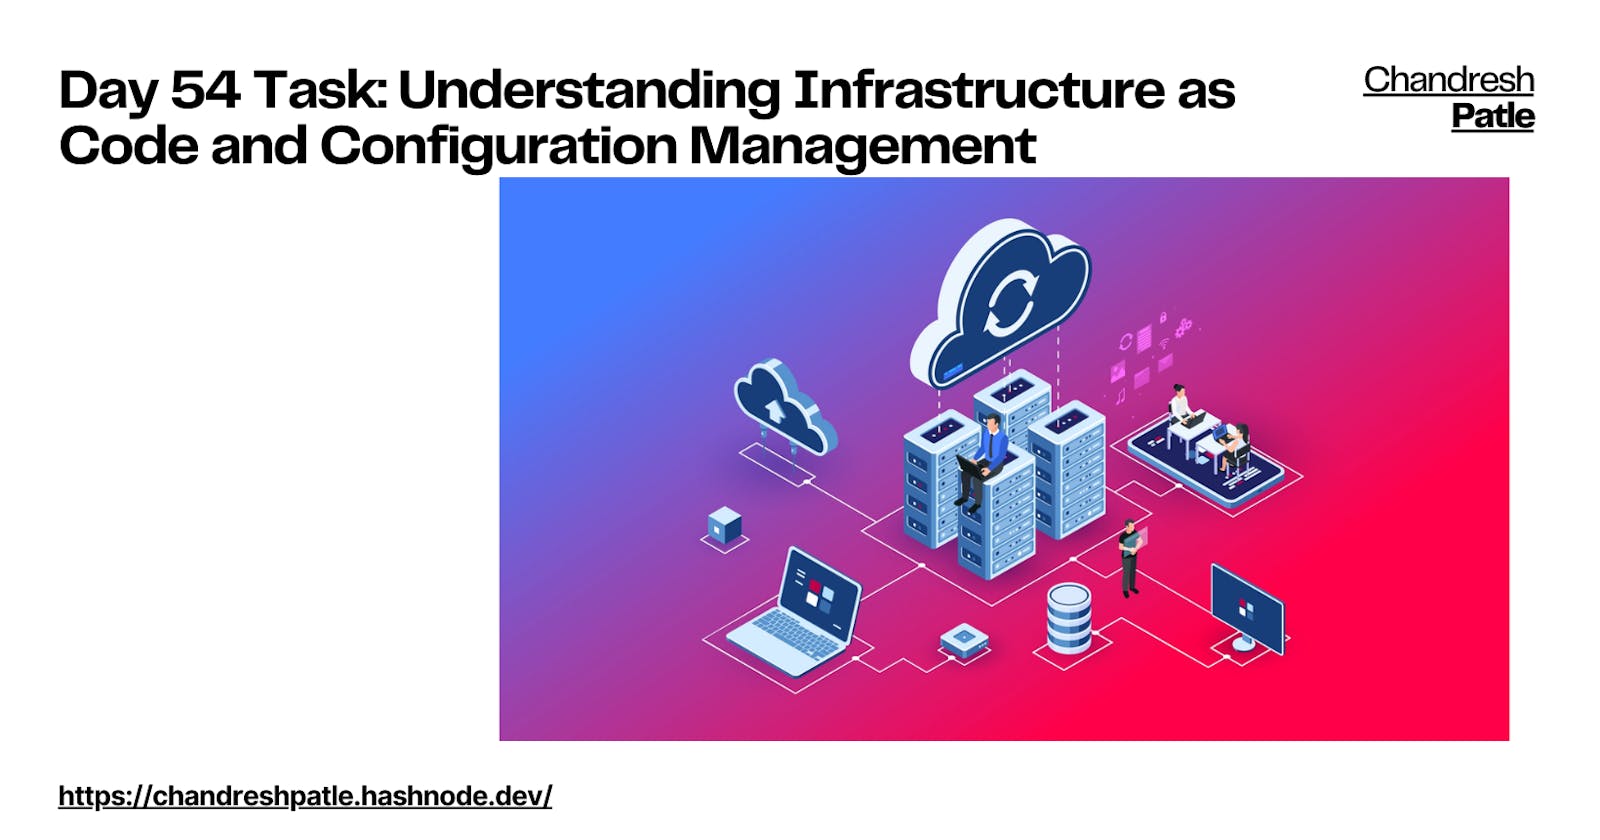 Day 54 Task: Understanding Infrastructure as Code and Configuration Management